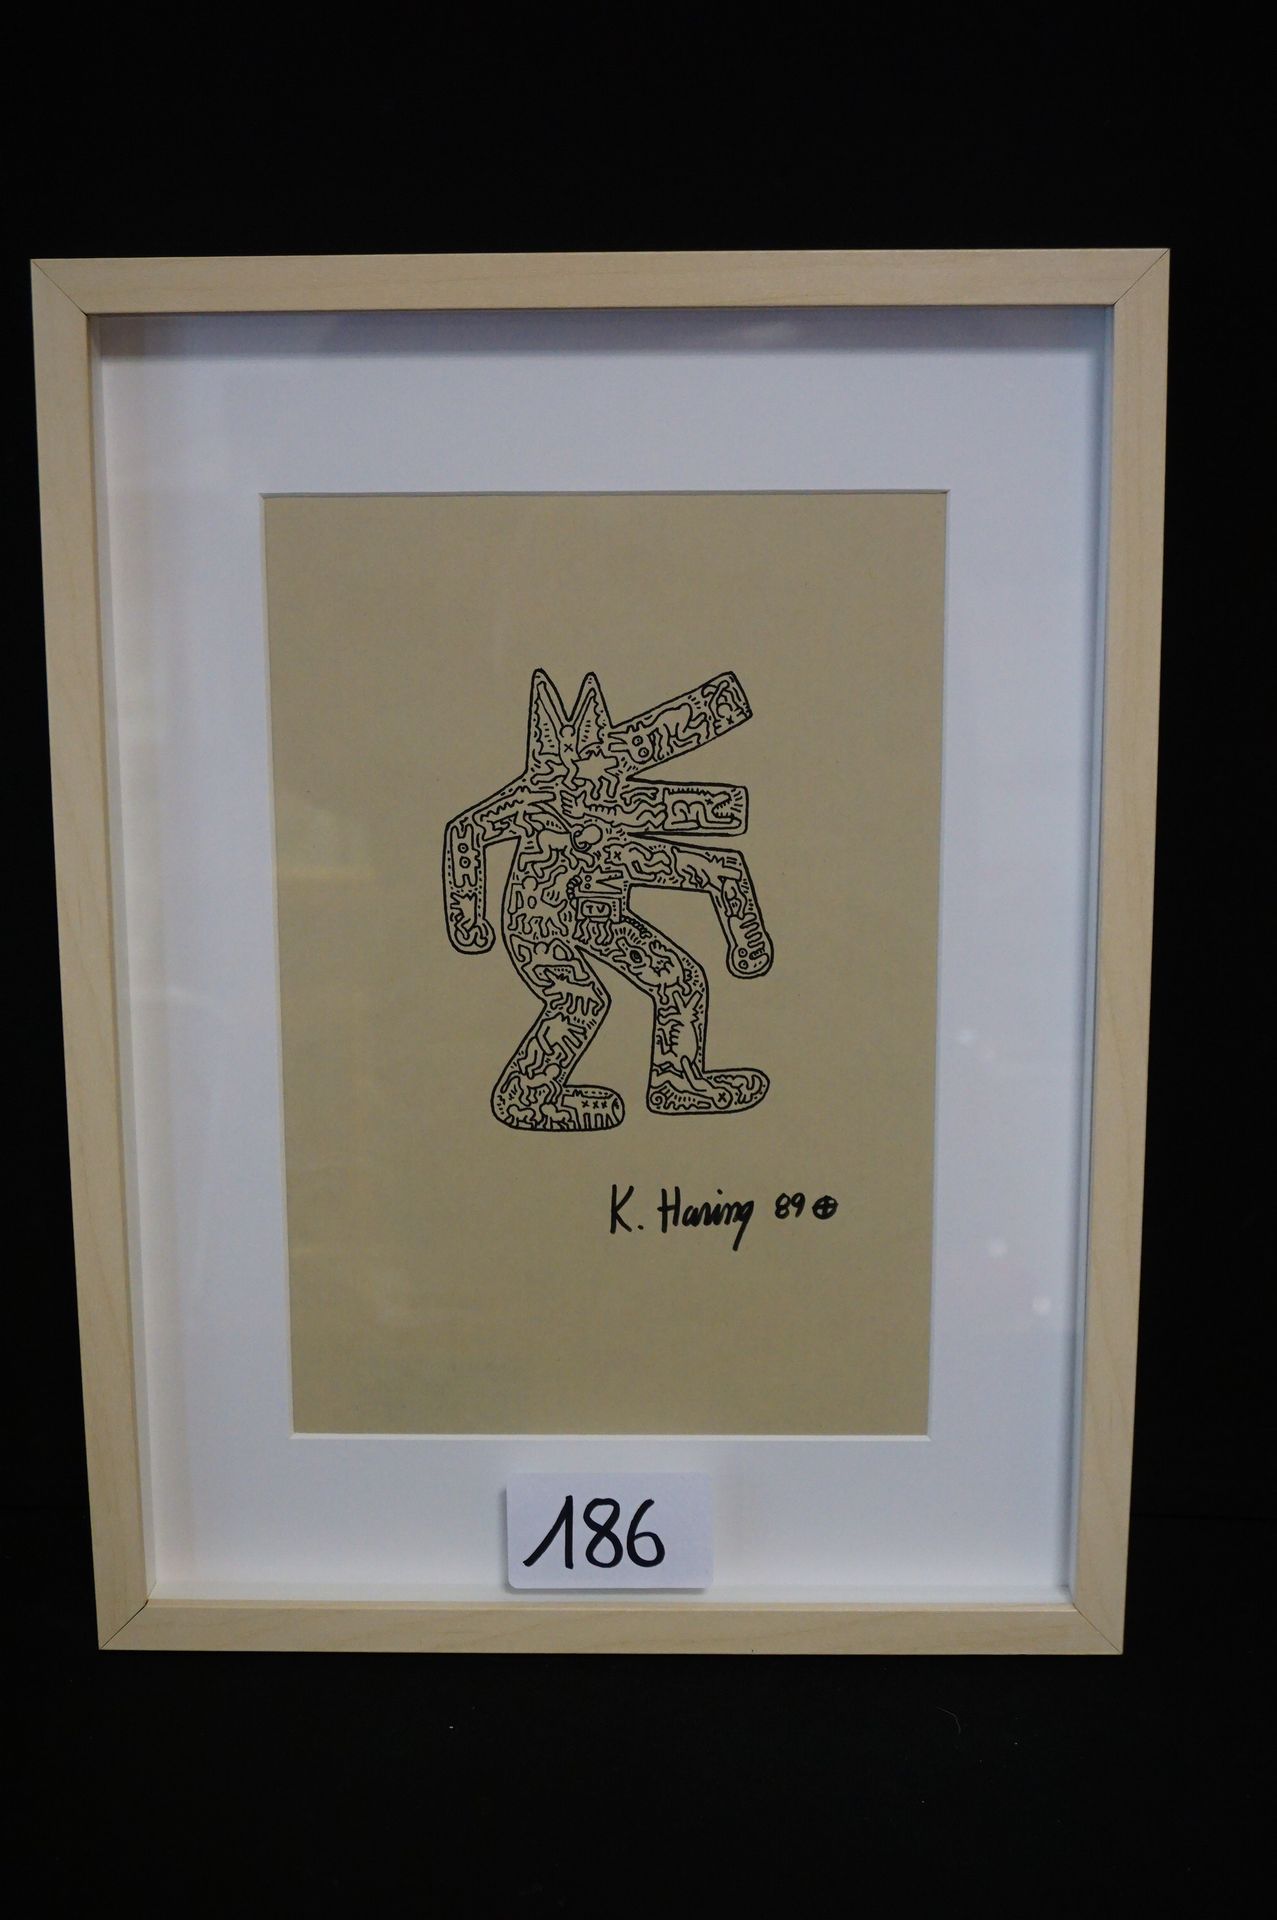 KEITH HARING (1958 - 1990) After - "Untitled" - Black marker on paper - Signed a&hellip;